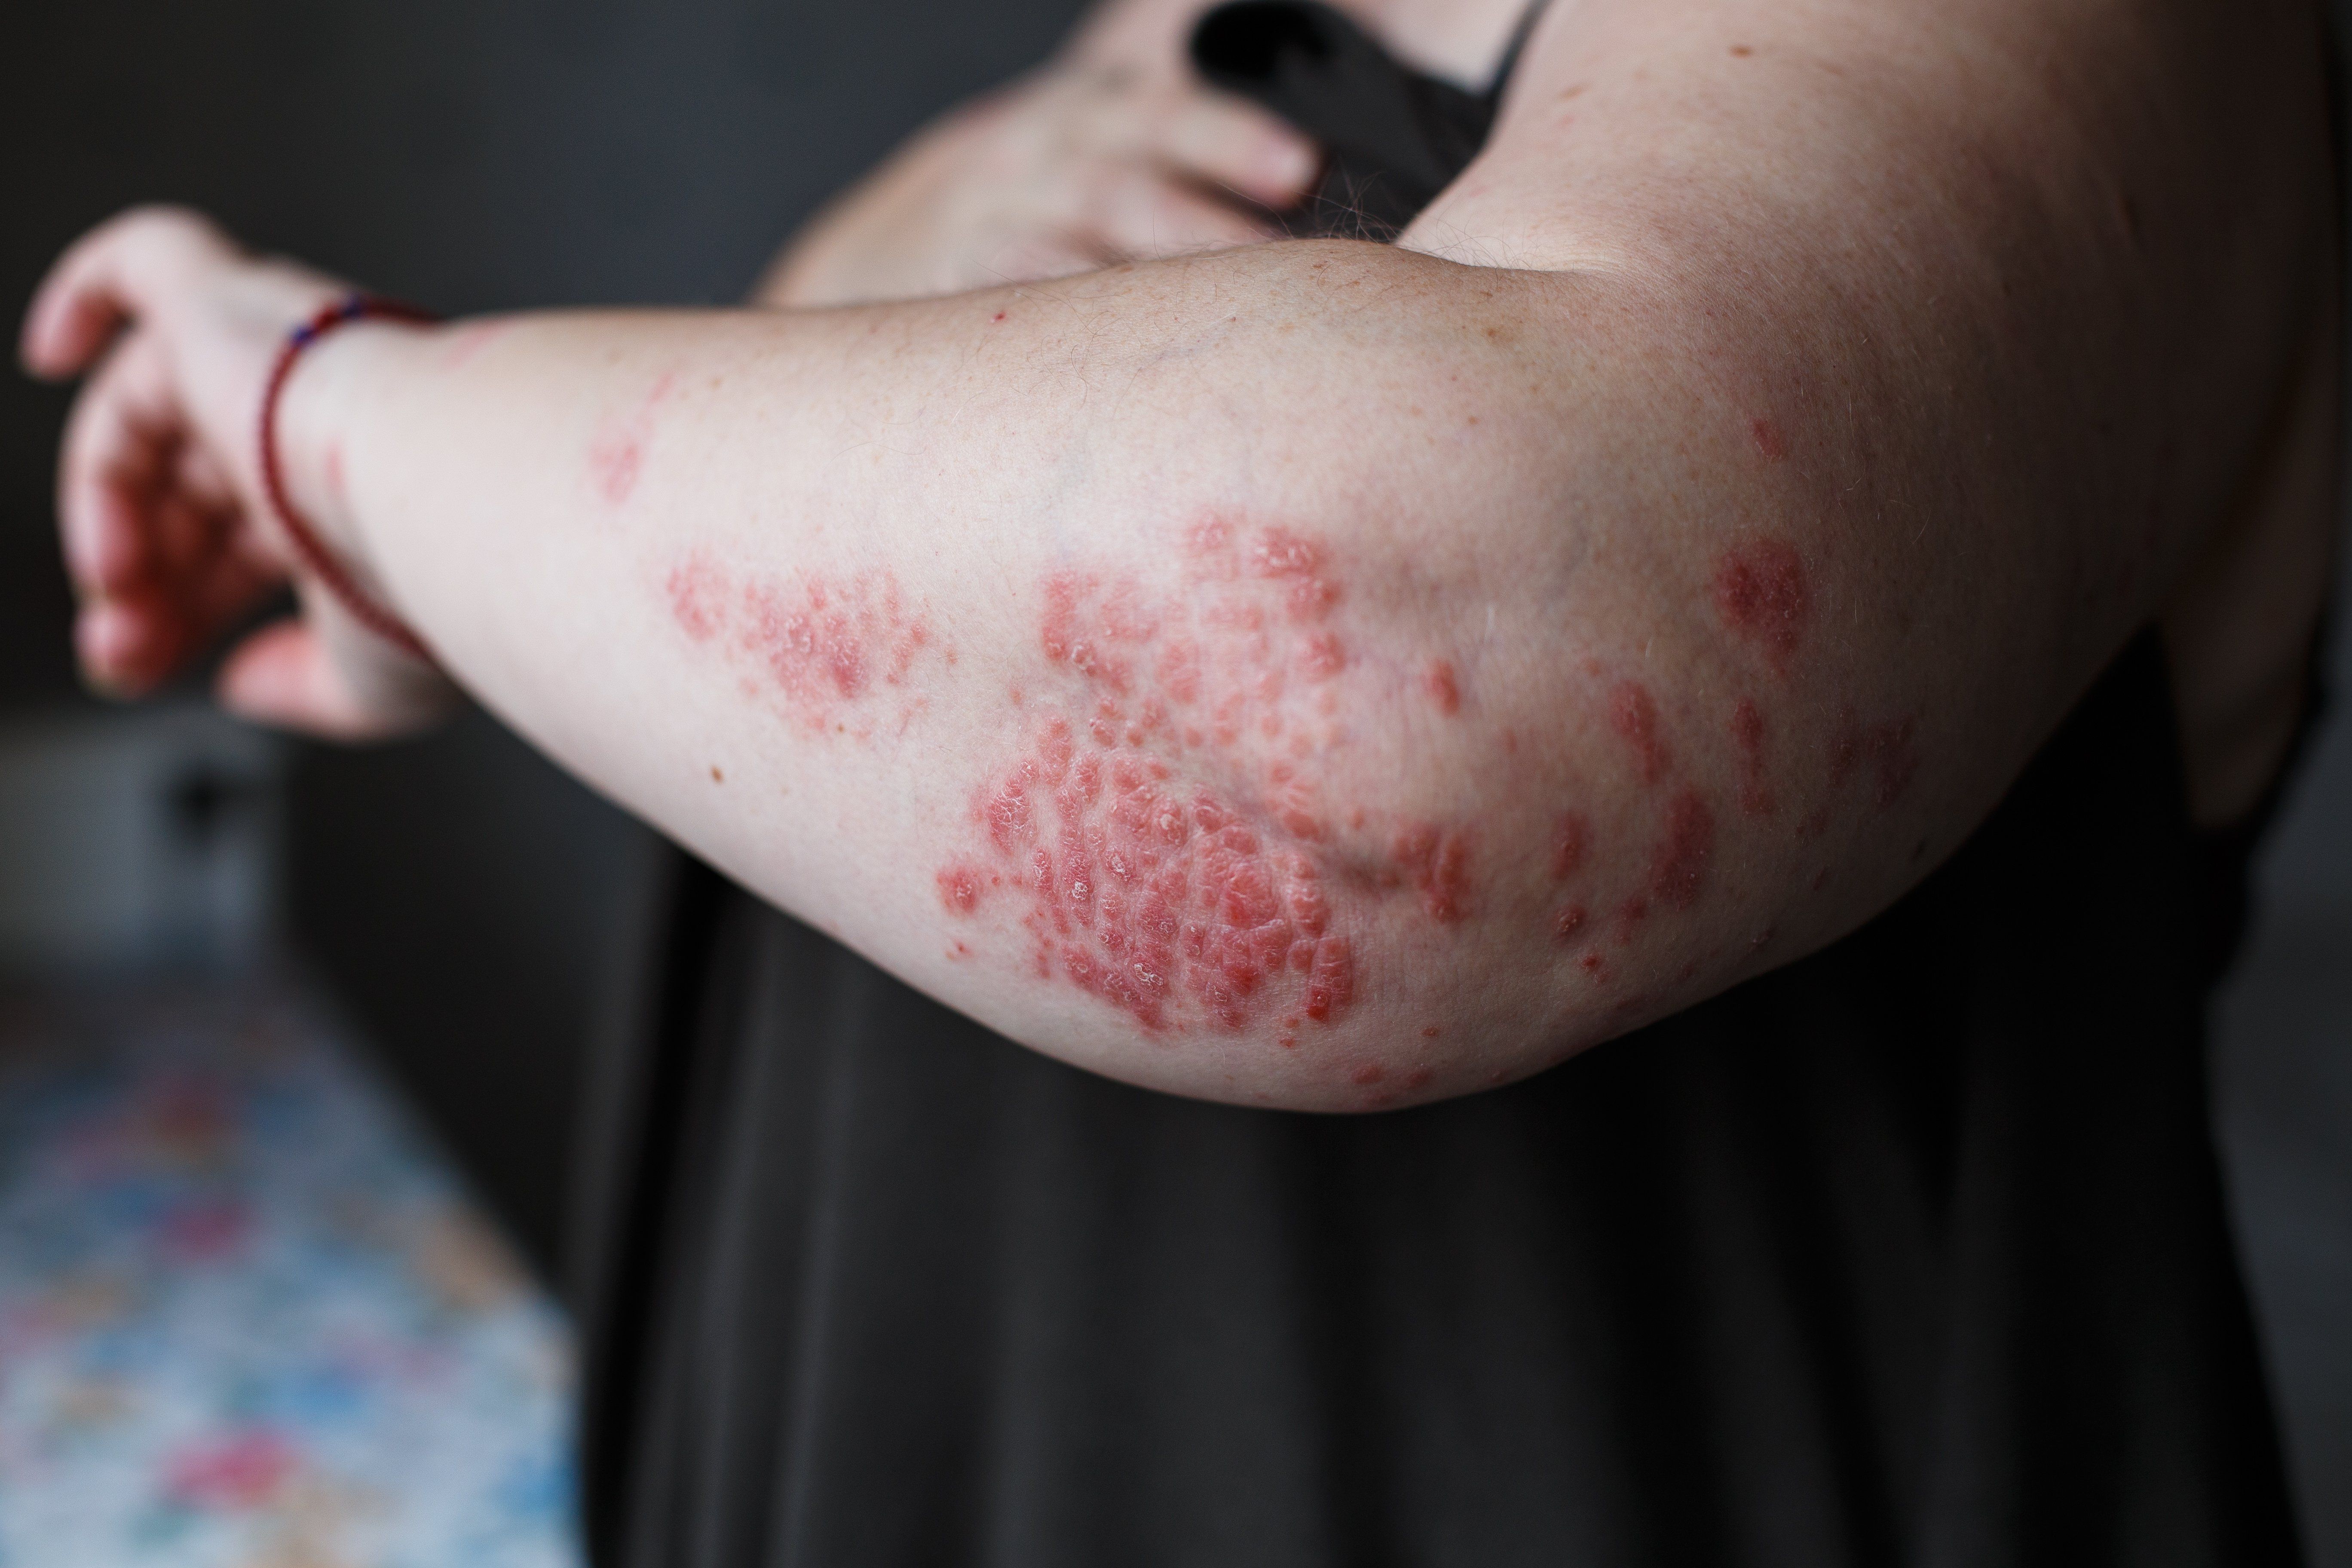 red psoriasis plaques on elbow